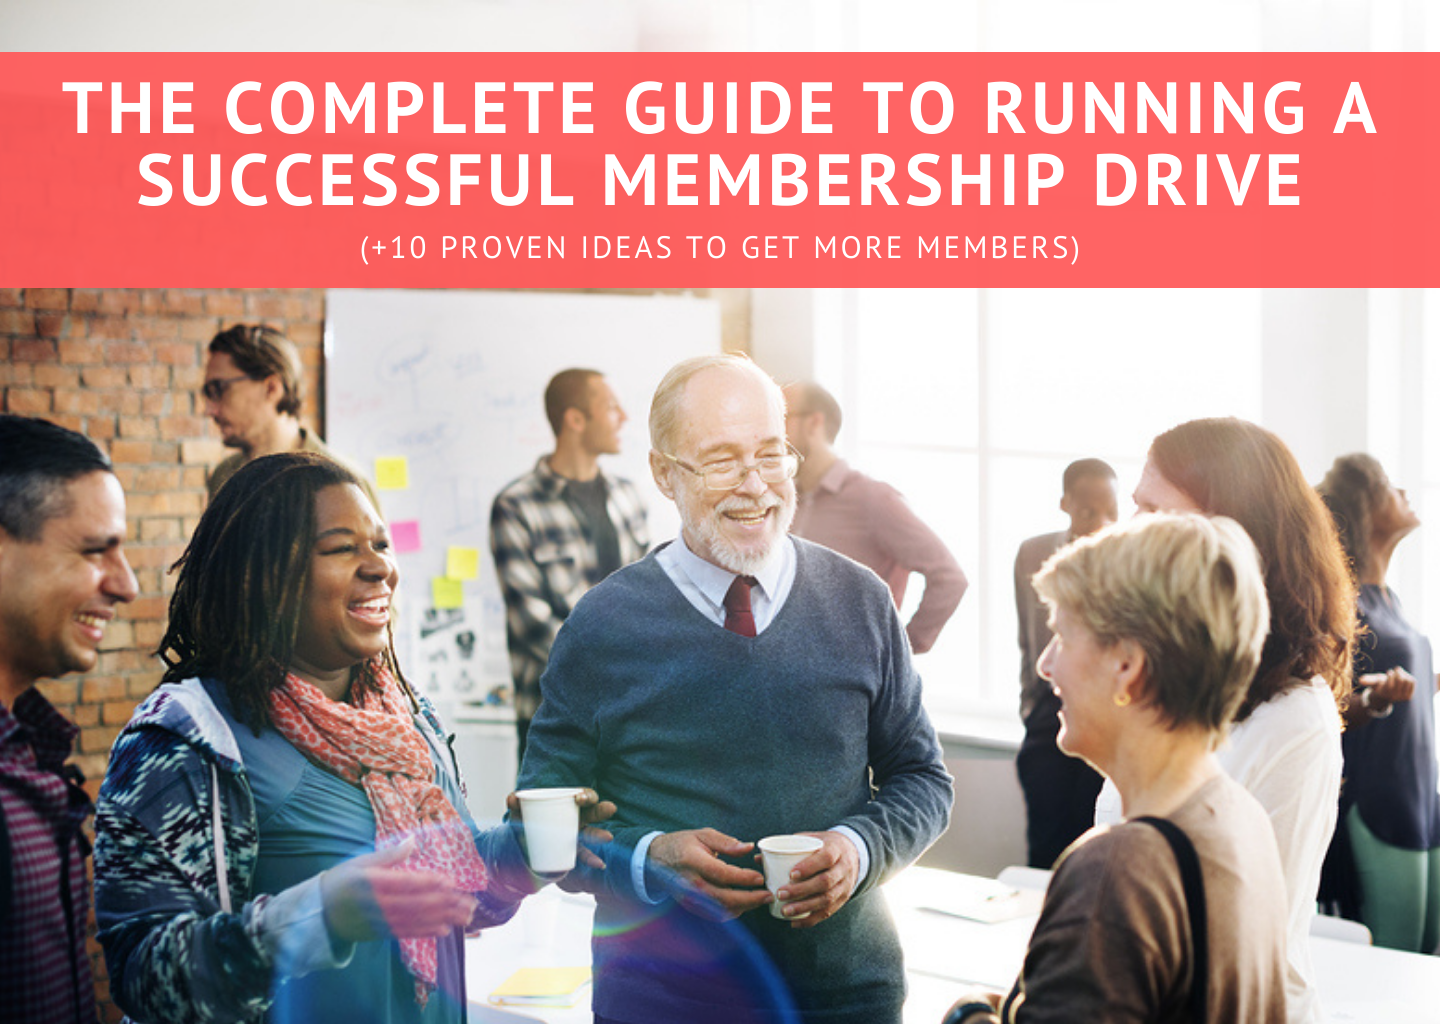 The Complete Guide to a Successful Membership Drive (+10 Proven Ideas to Get More Members)